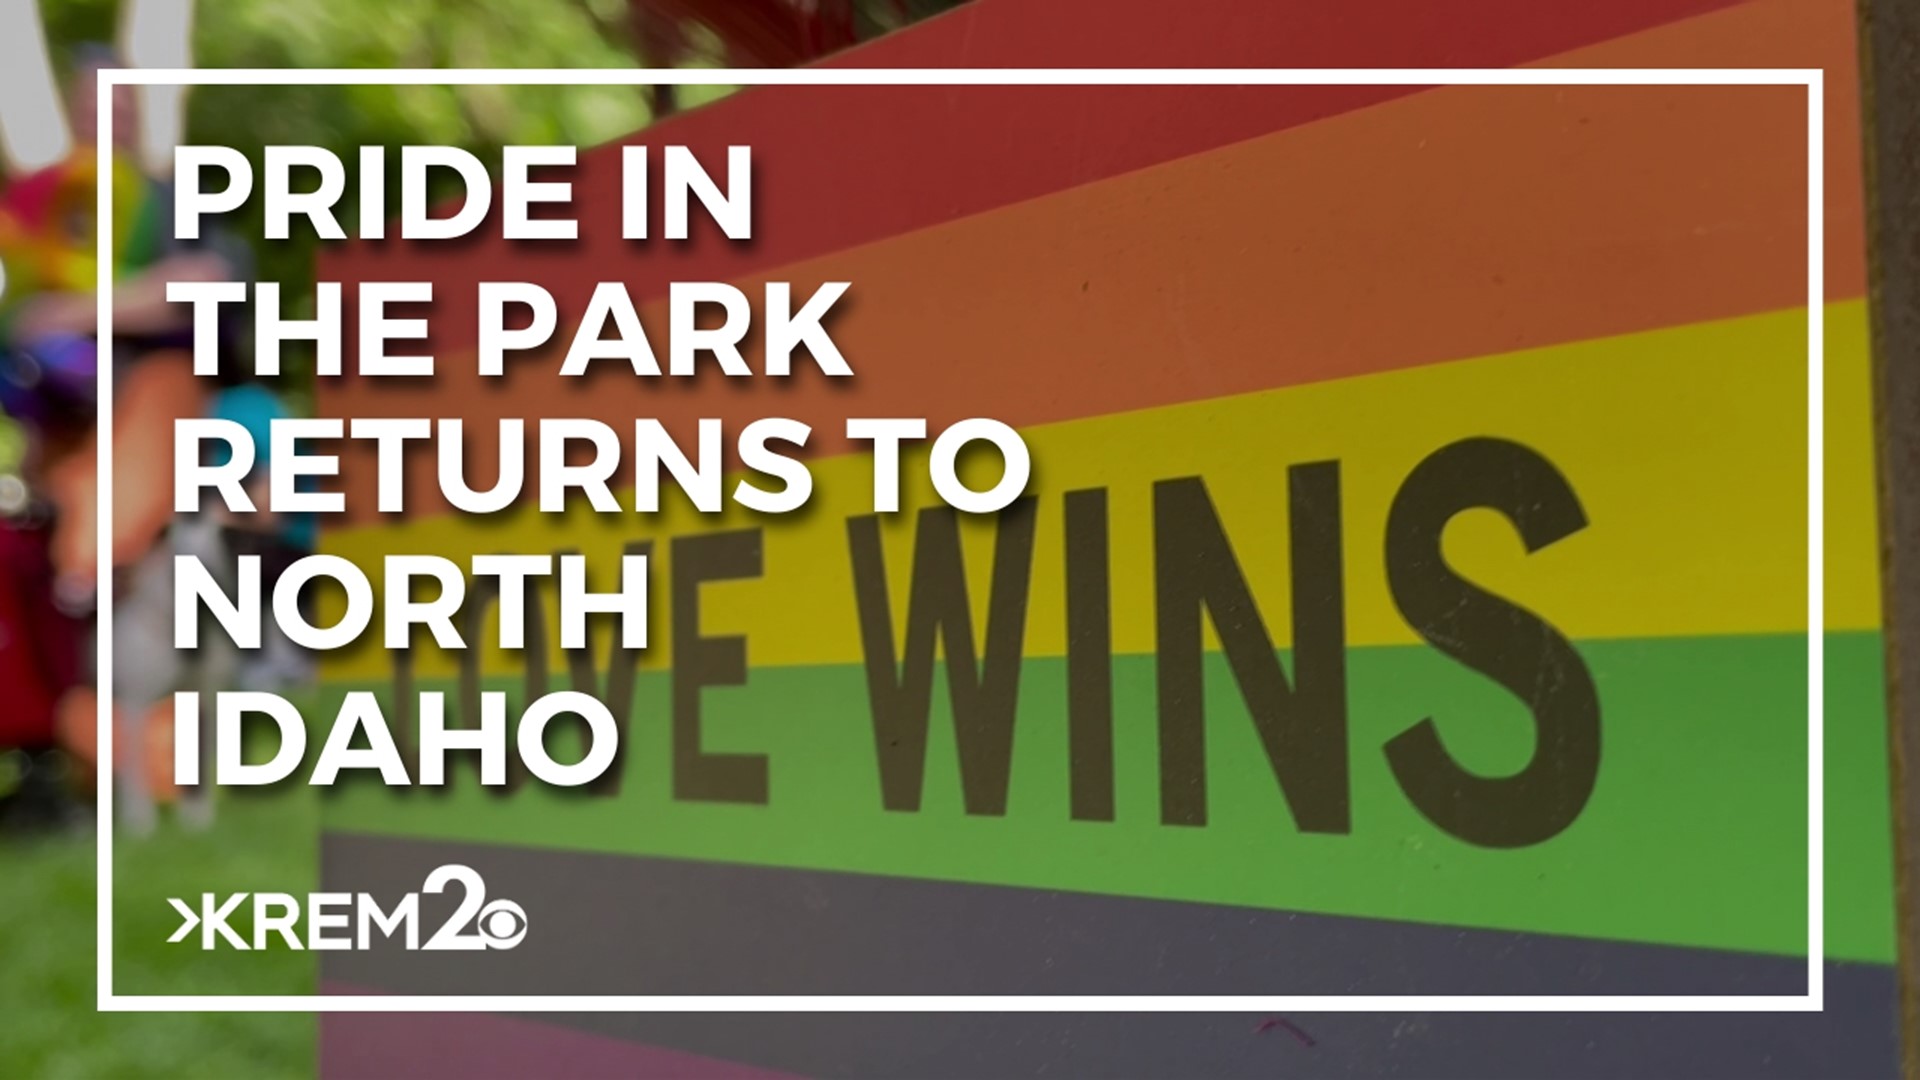 Pride in the Park is taking place Saturday, June 3rd from 10 a.m. until 3 p.m. at the Coeur d'Alene City Park and Bandshell.